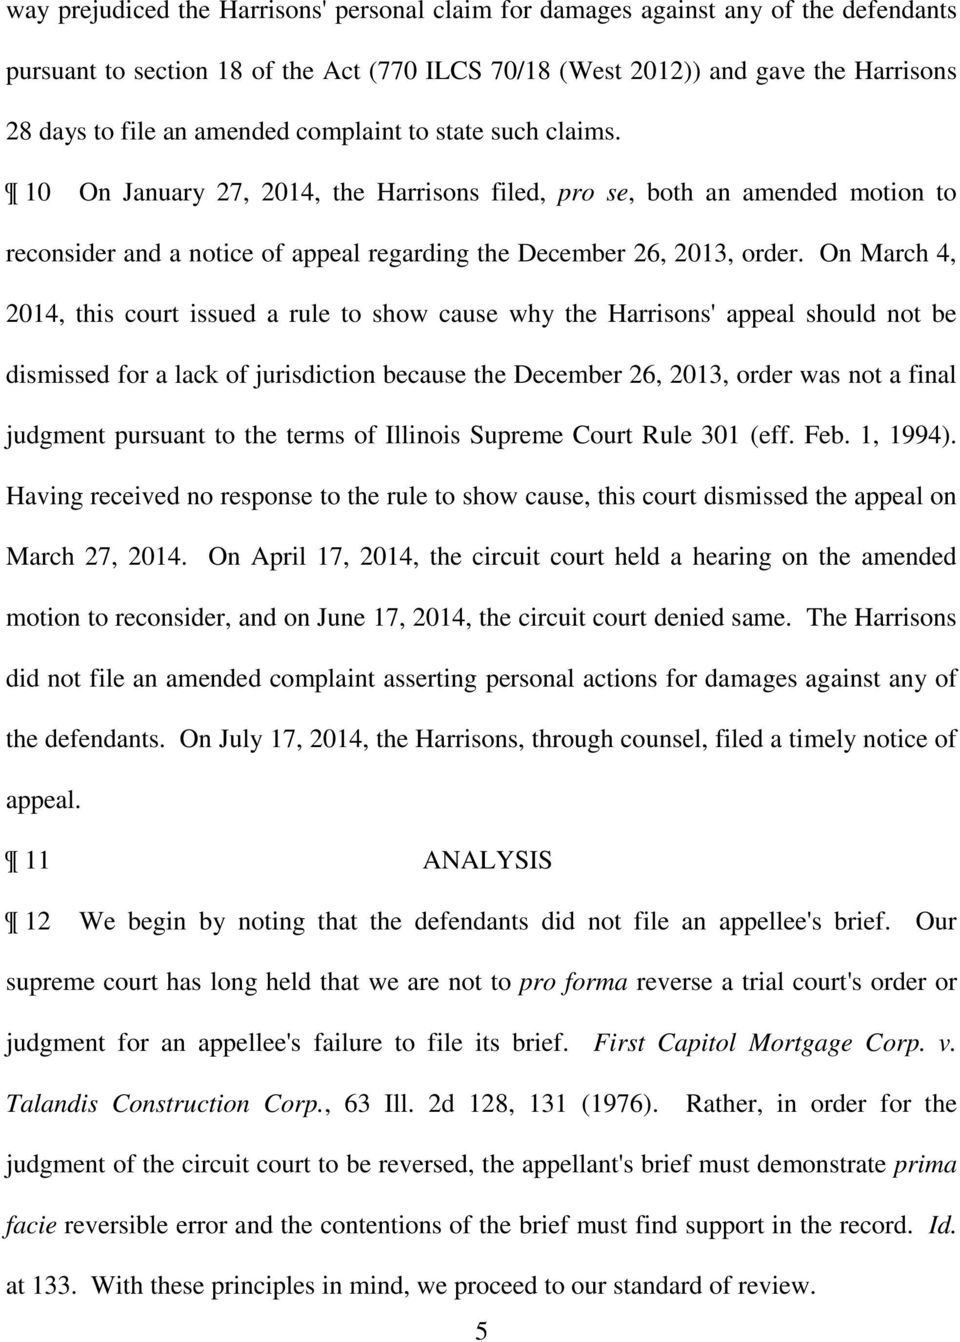 On March 4, 2014, this court issued a rule to show cause why the Harrisons' appeal should not be dismissed for a lack of jurisdiction because the December 26, 2013, order was not a final judgment